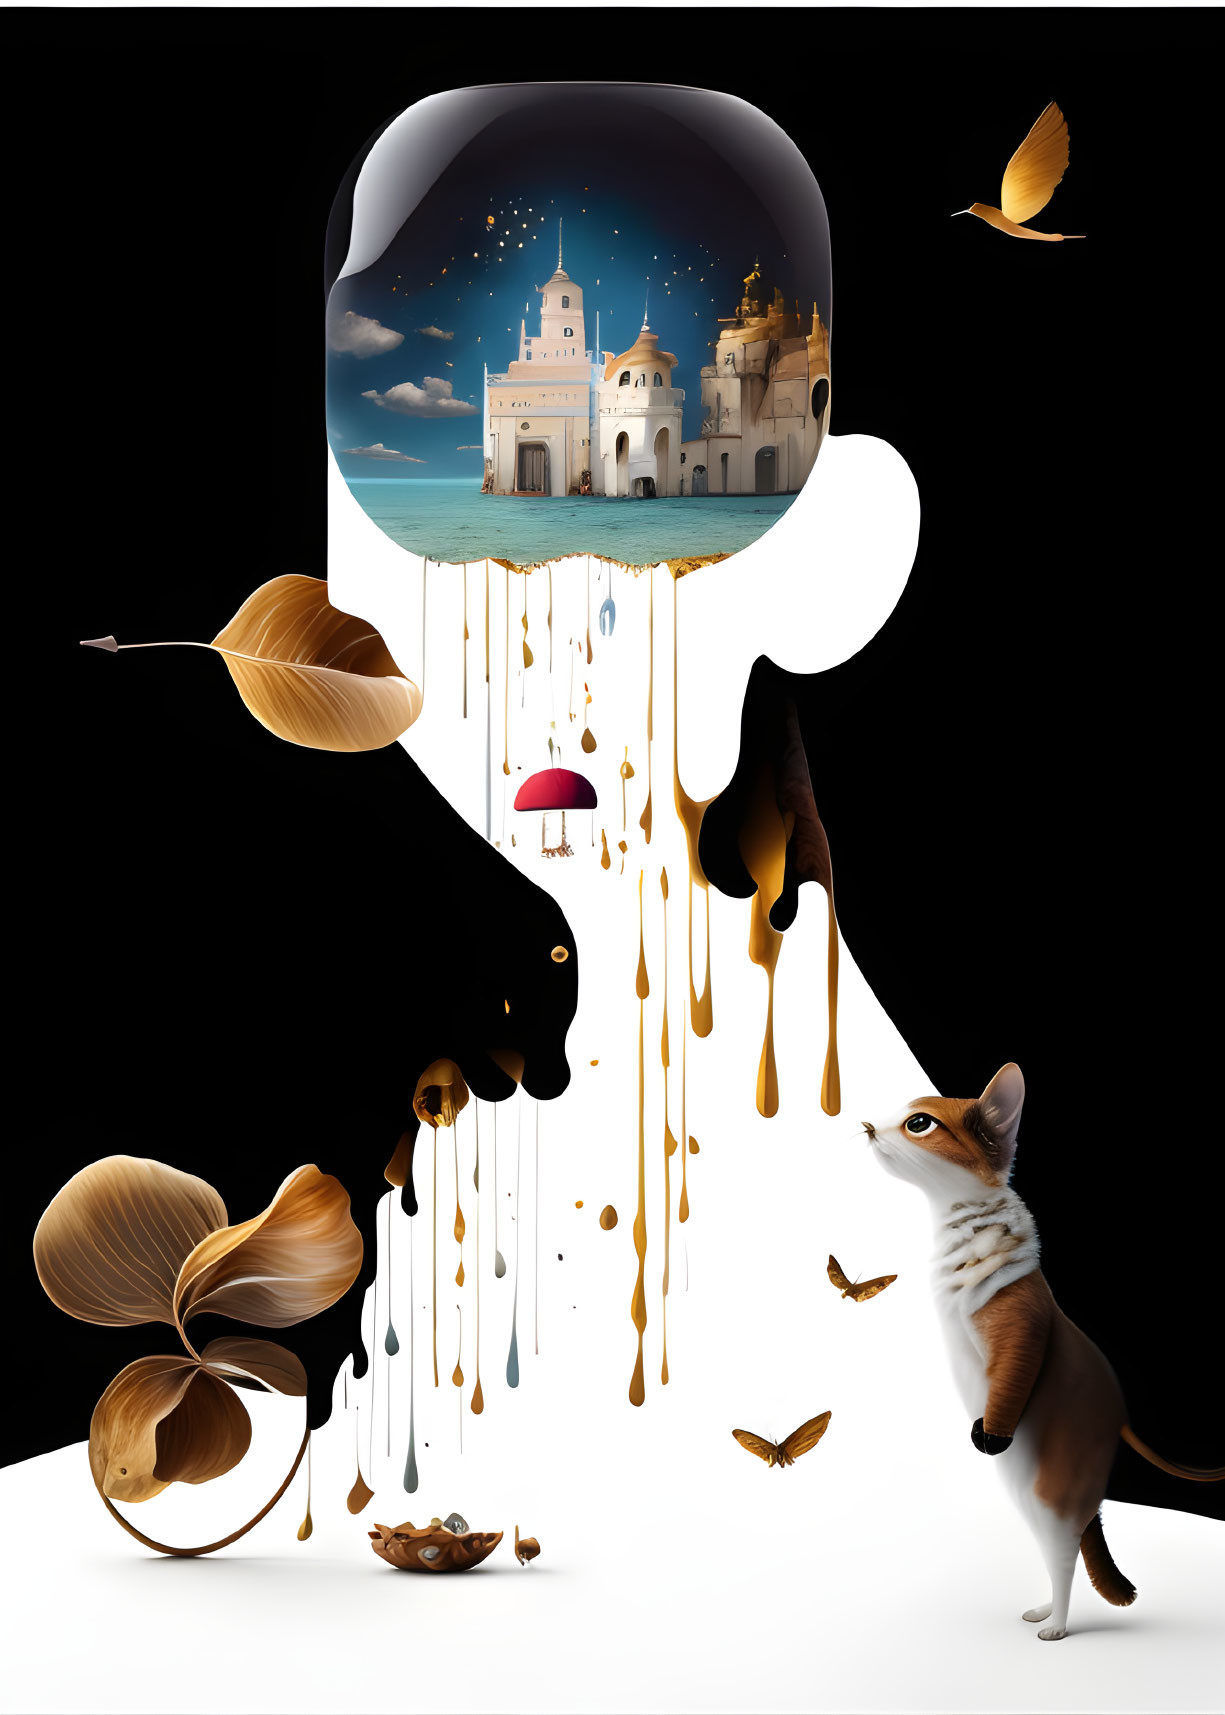 Fantastical dog silhouette with castle, butterflies, gold elements, leaves